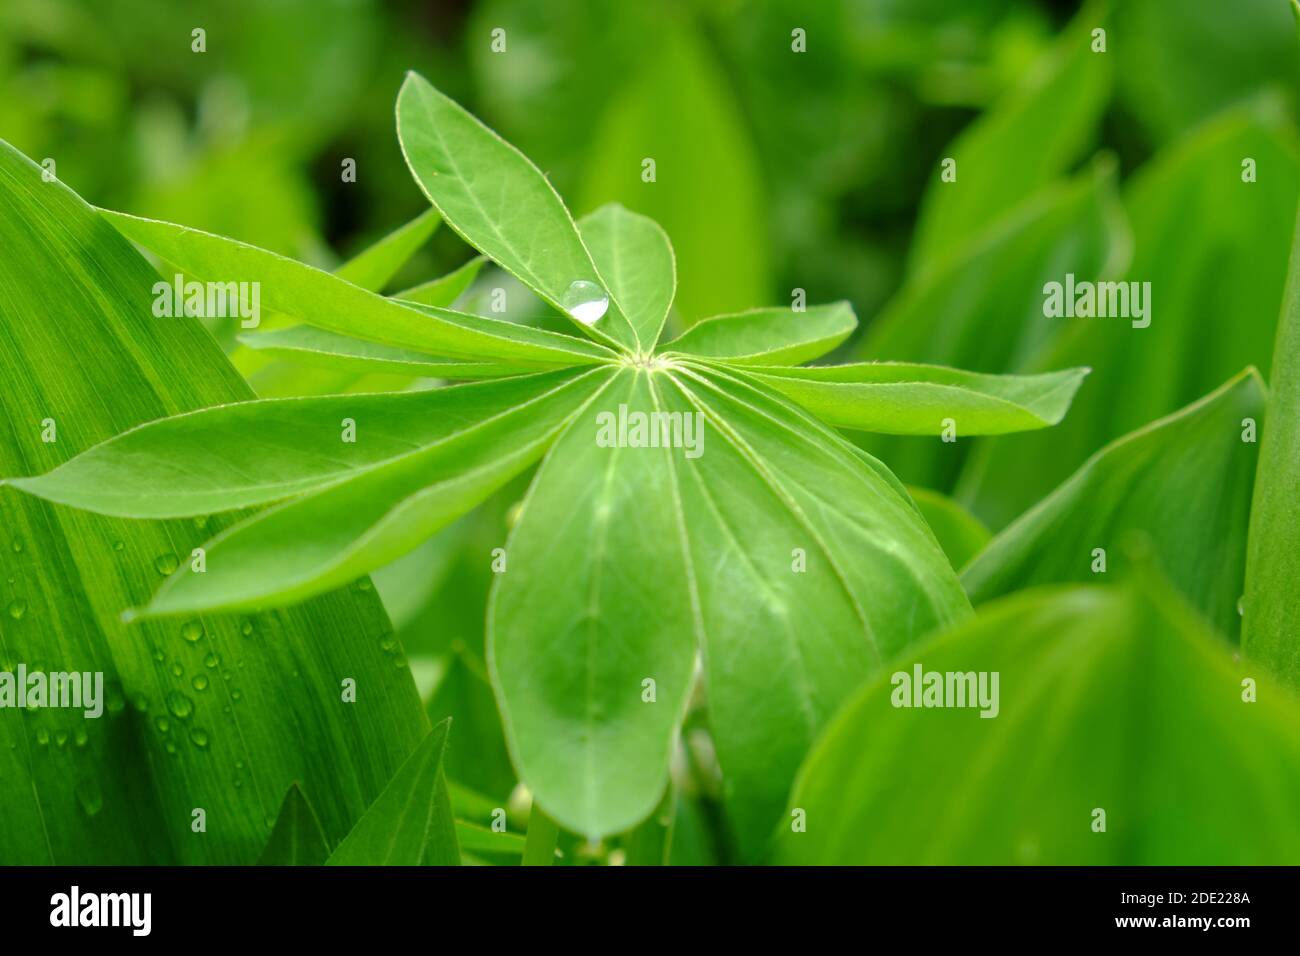 A large drop of water on a sheet of lupine. Stock Photo